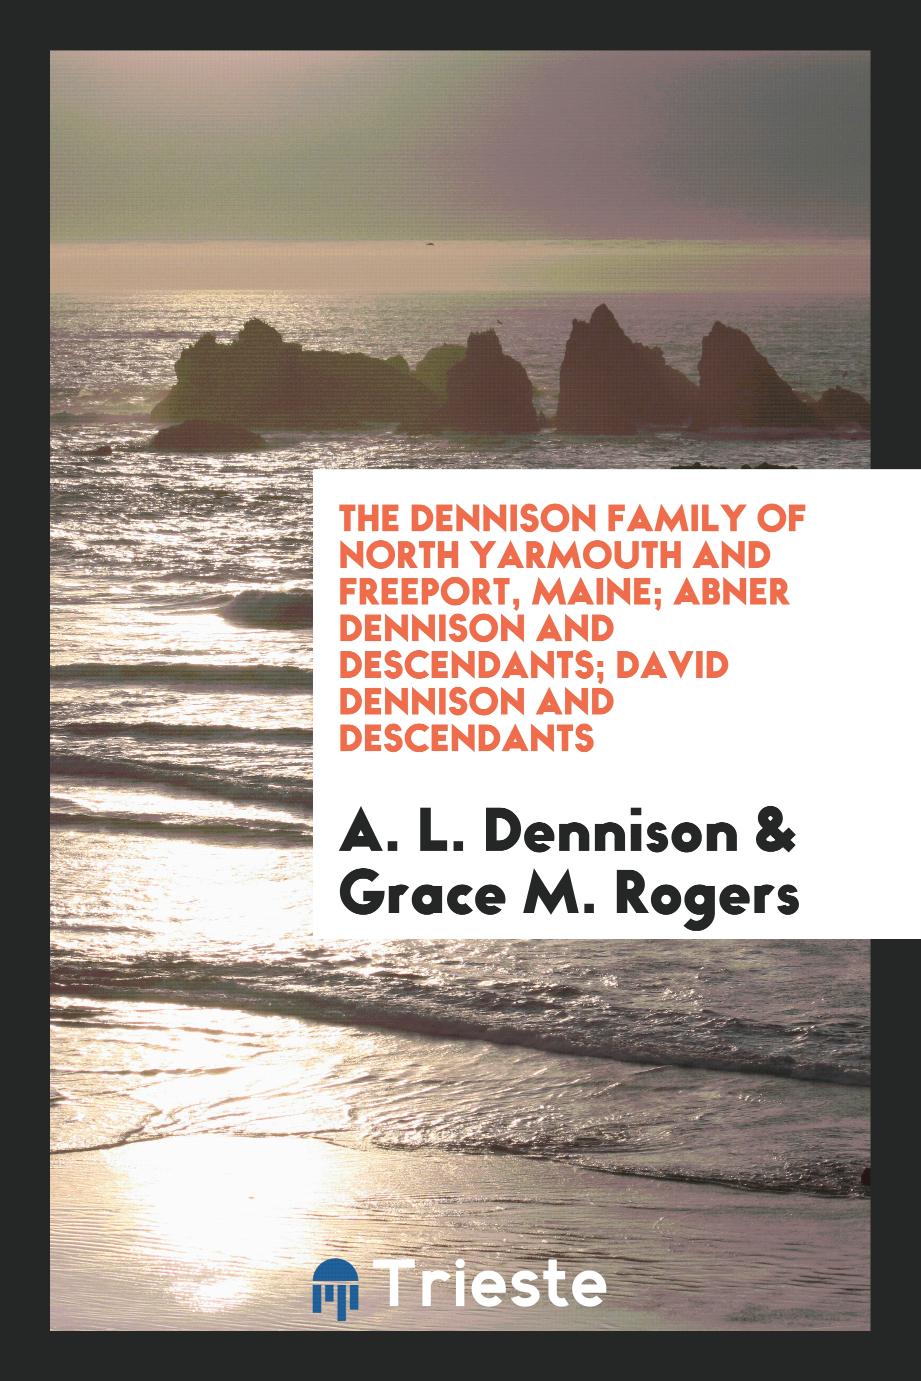 The Dennison family of North Yarmouth and Freeport, Maine; Abner Dennison and Descendants; David Dennison and Descendants